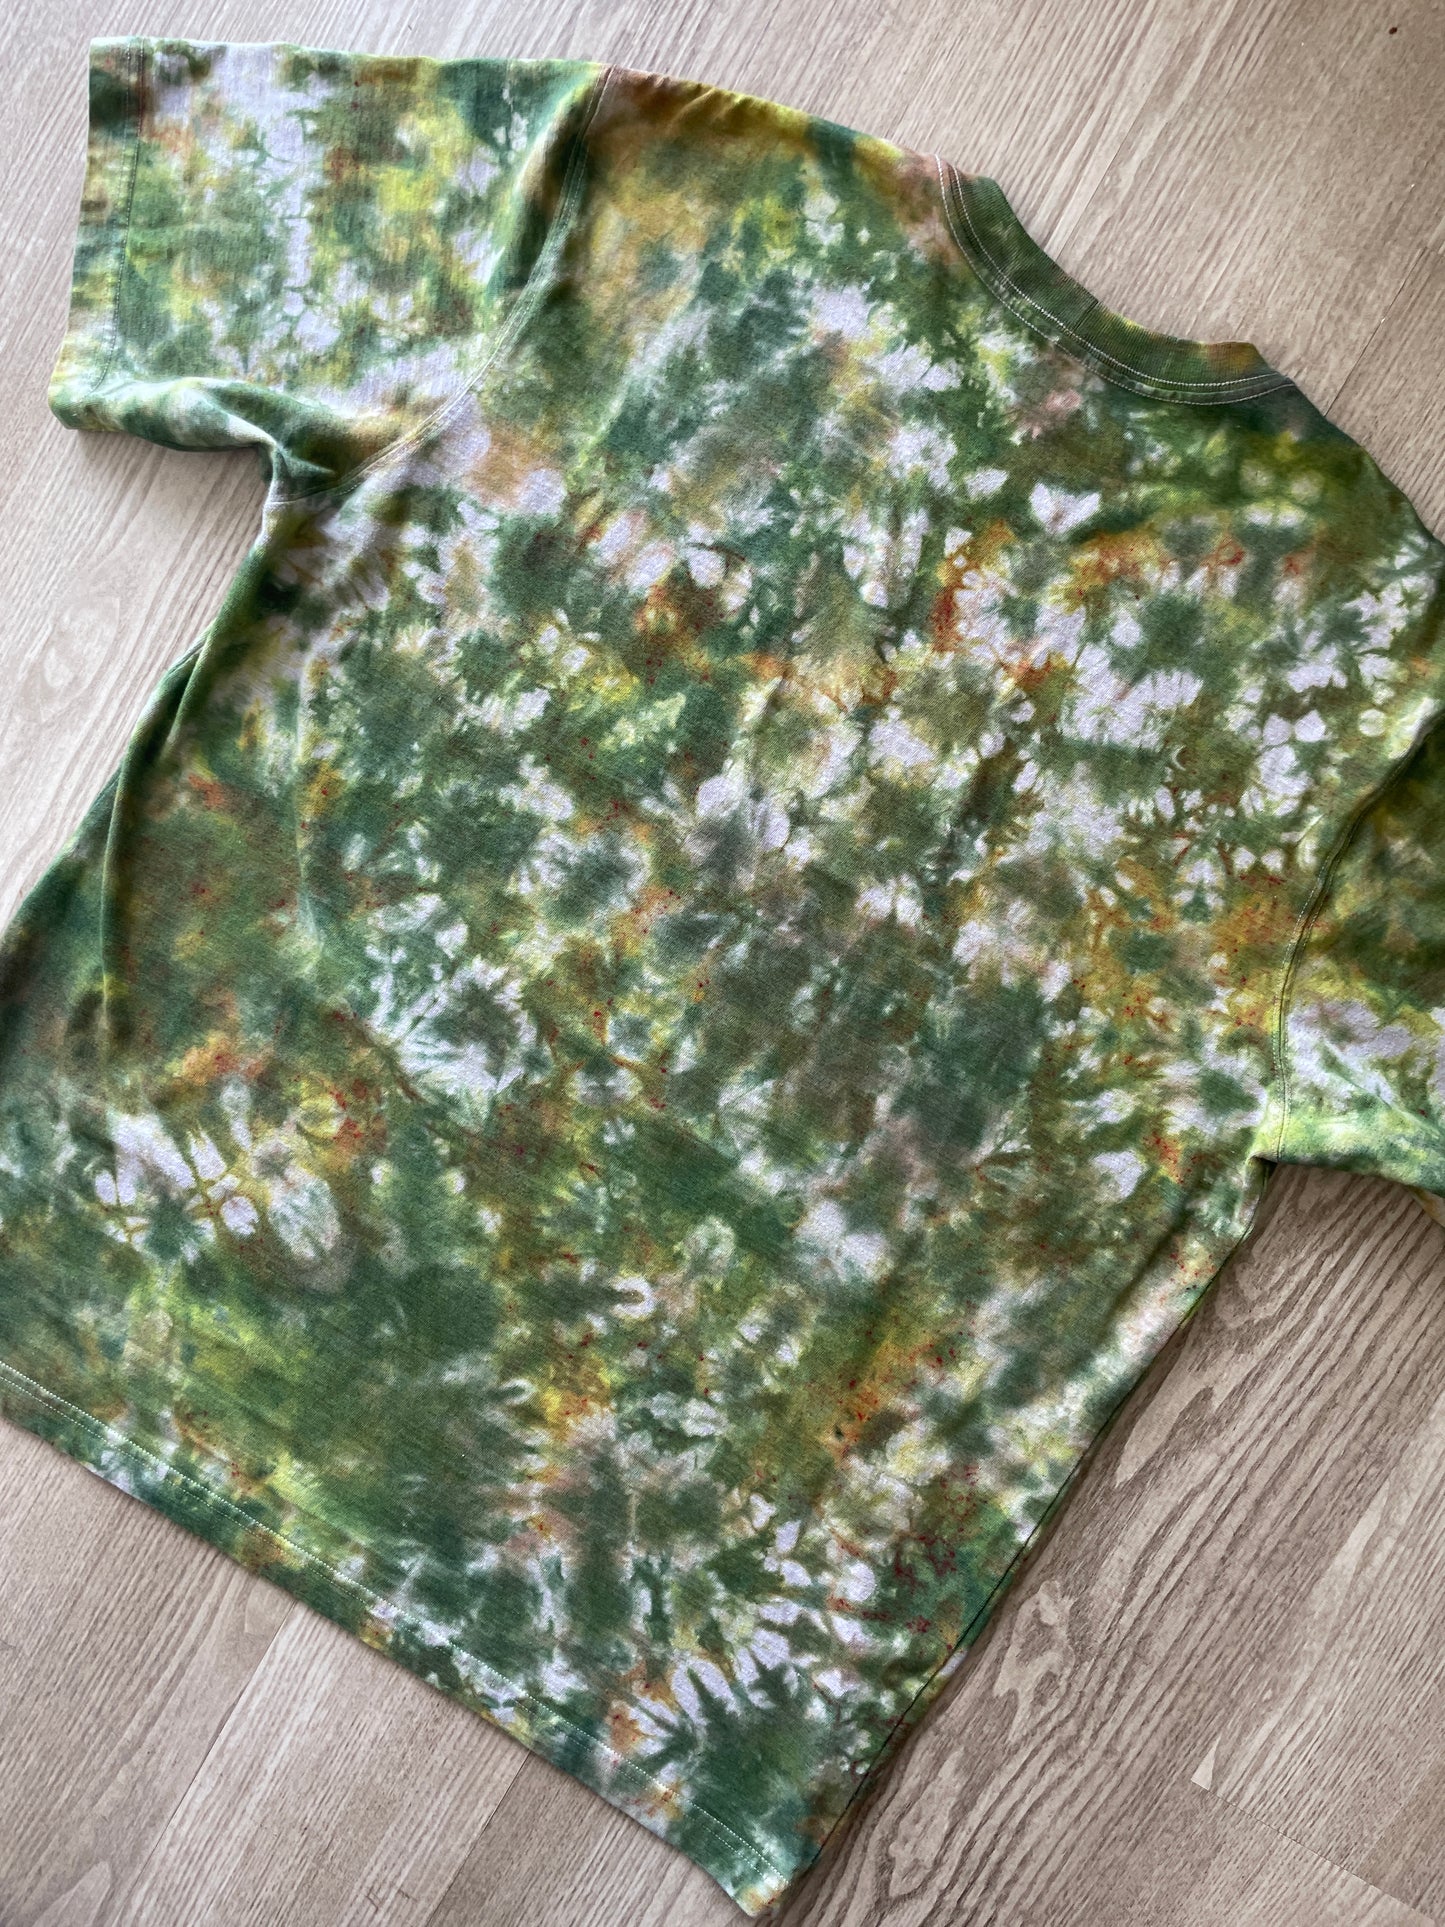 XL Men’s Carhartt Handmade Tie Dye T-Shirt with Breast Pocket | One-Of-a-Kind Green, Yellow, and Gray Short Sleeve